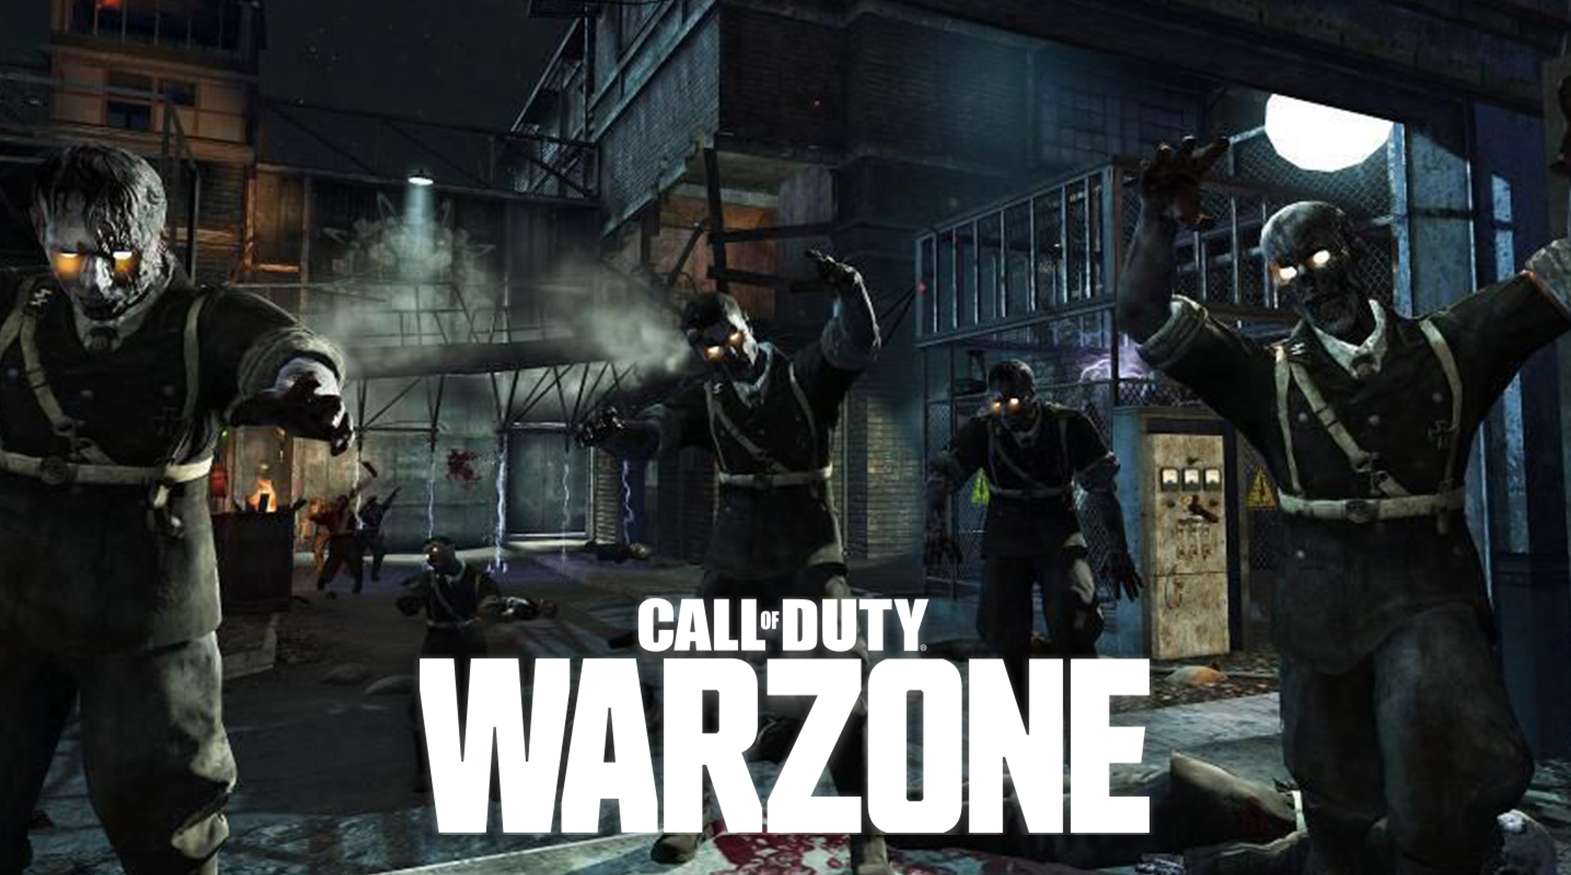 Call of Duty zombies in Warzone